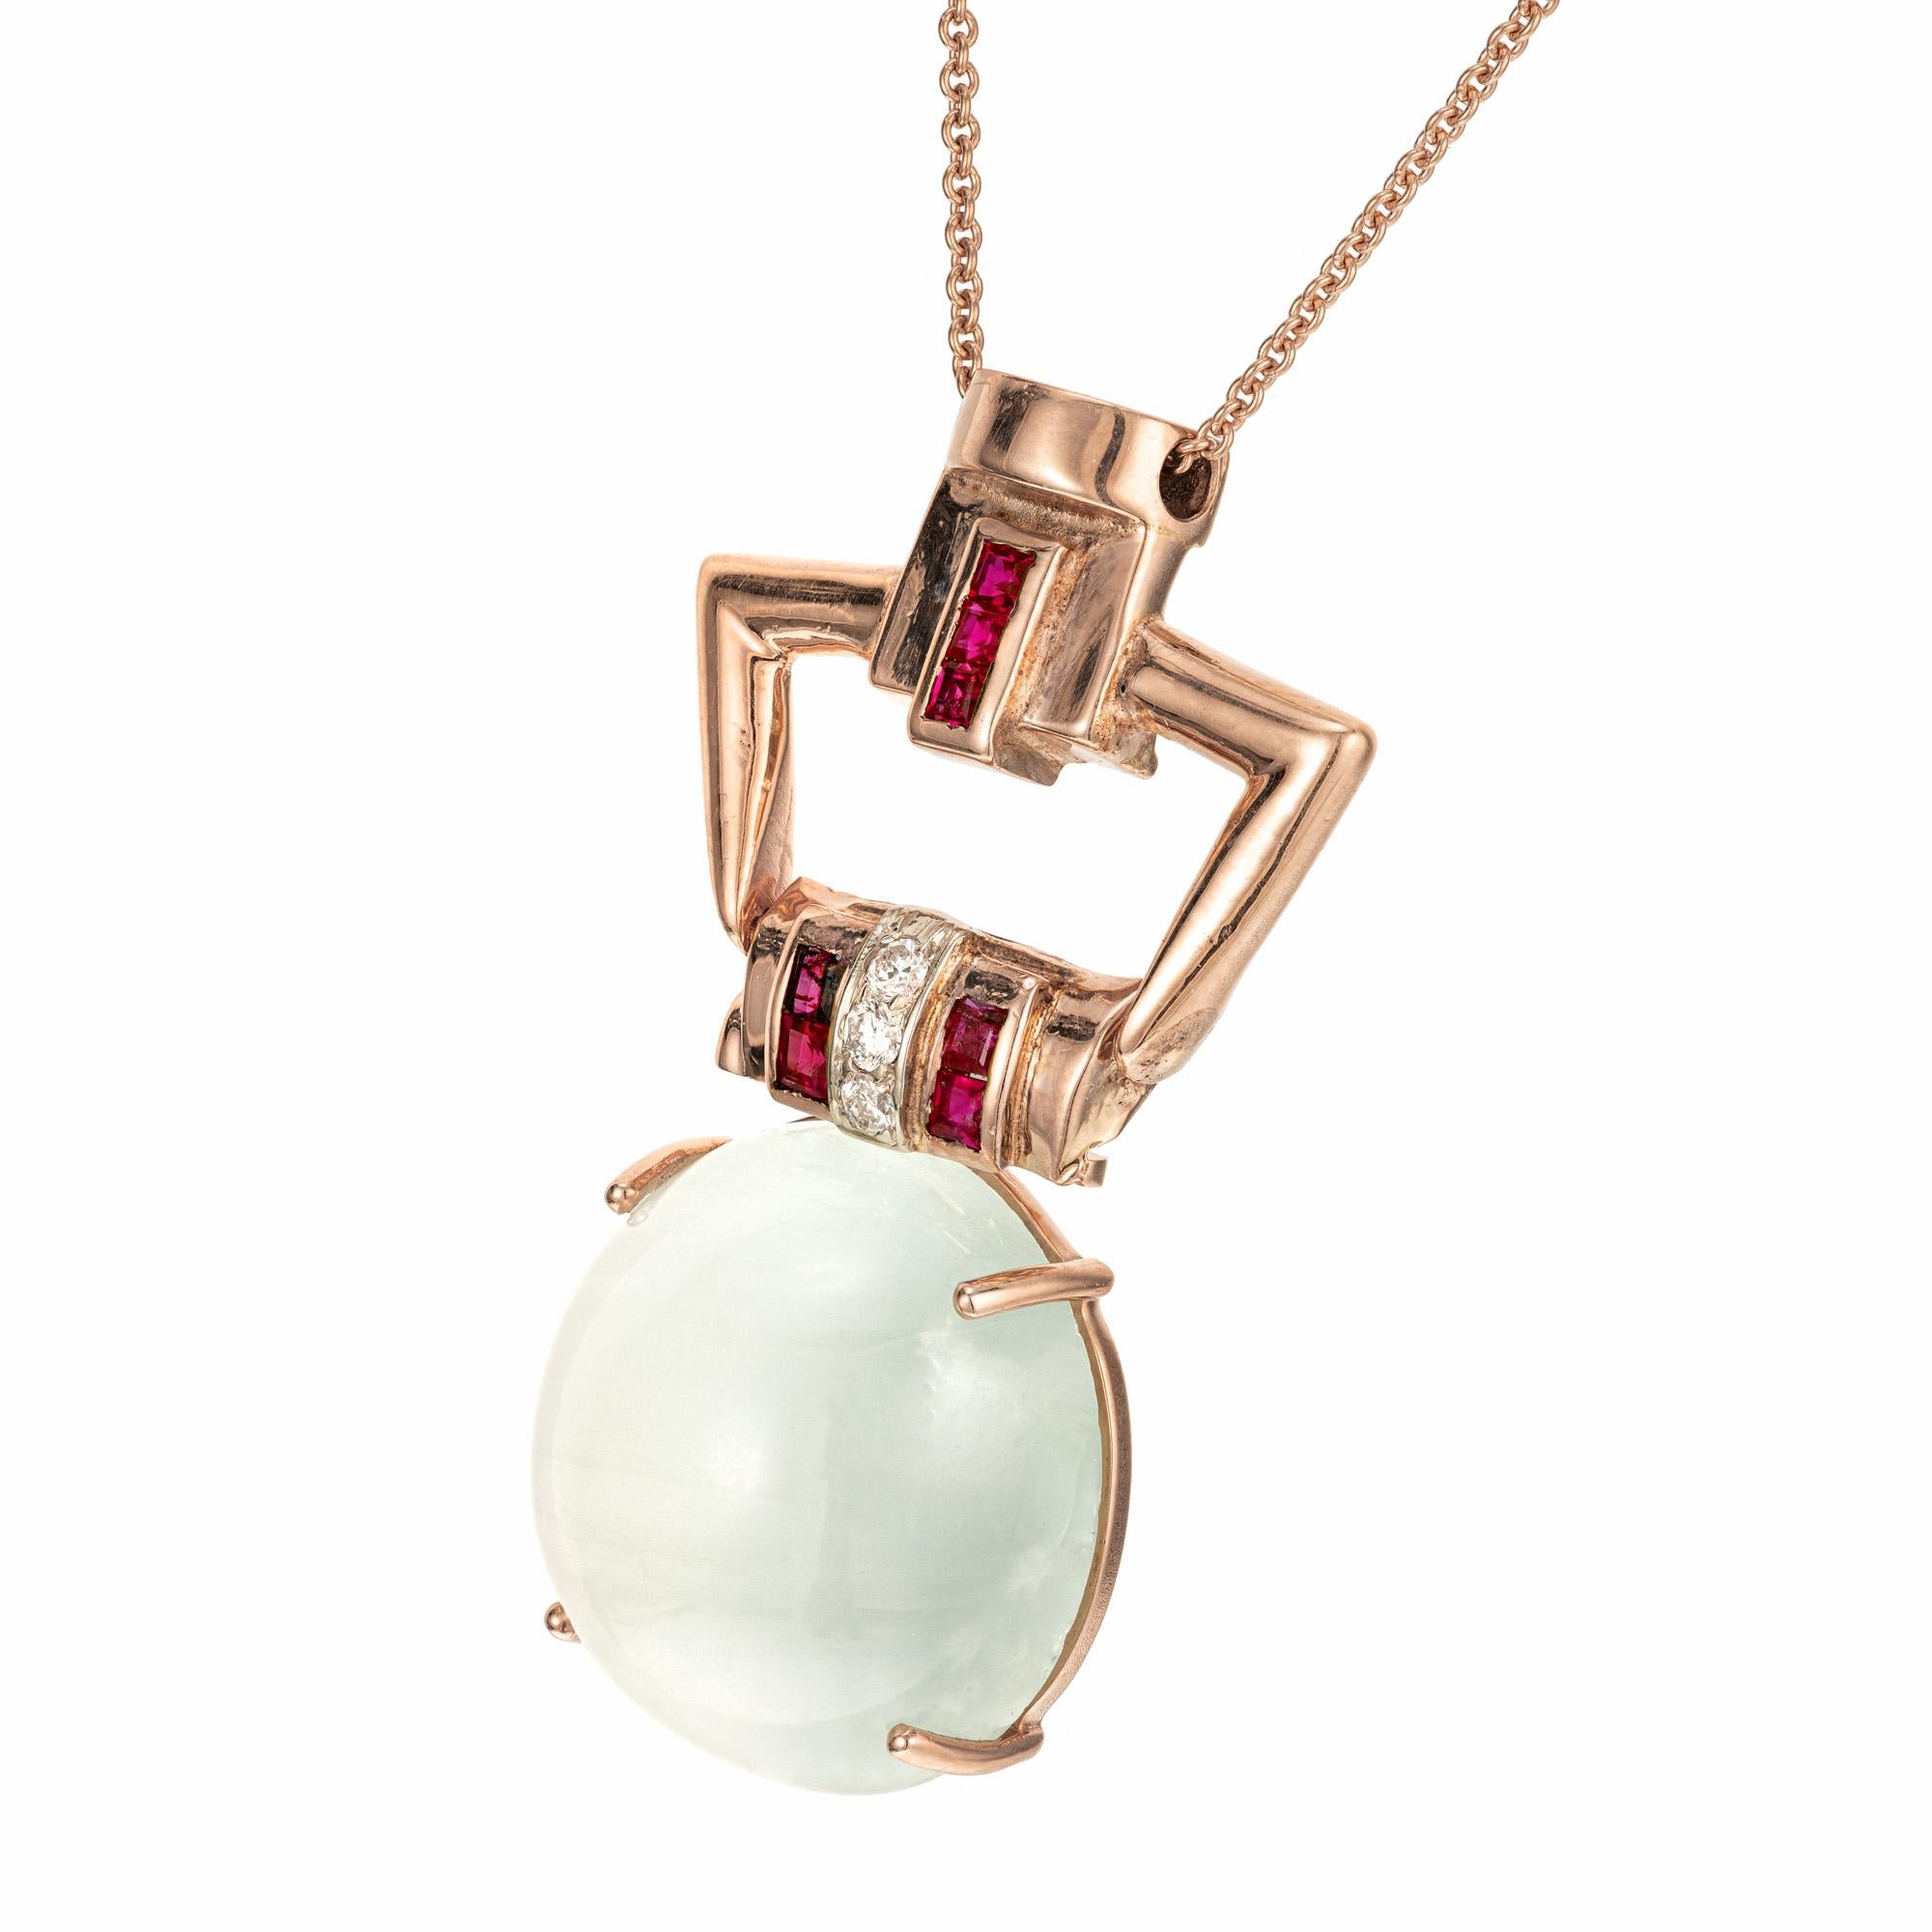 Retro Art Deco Cats Eye Aqua, diamond and ruby pendant necklace. 20.50 cabochon natural cats eye Aqua with a 14k rose gold bail, accented with 3 transitional cut diamonds and 7 square cut rubies.  16 inch rose gold chain. Circa 1935 – 1940.

1 light